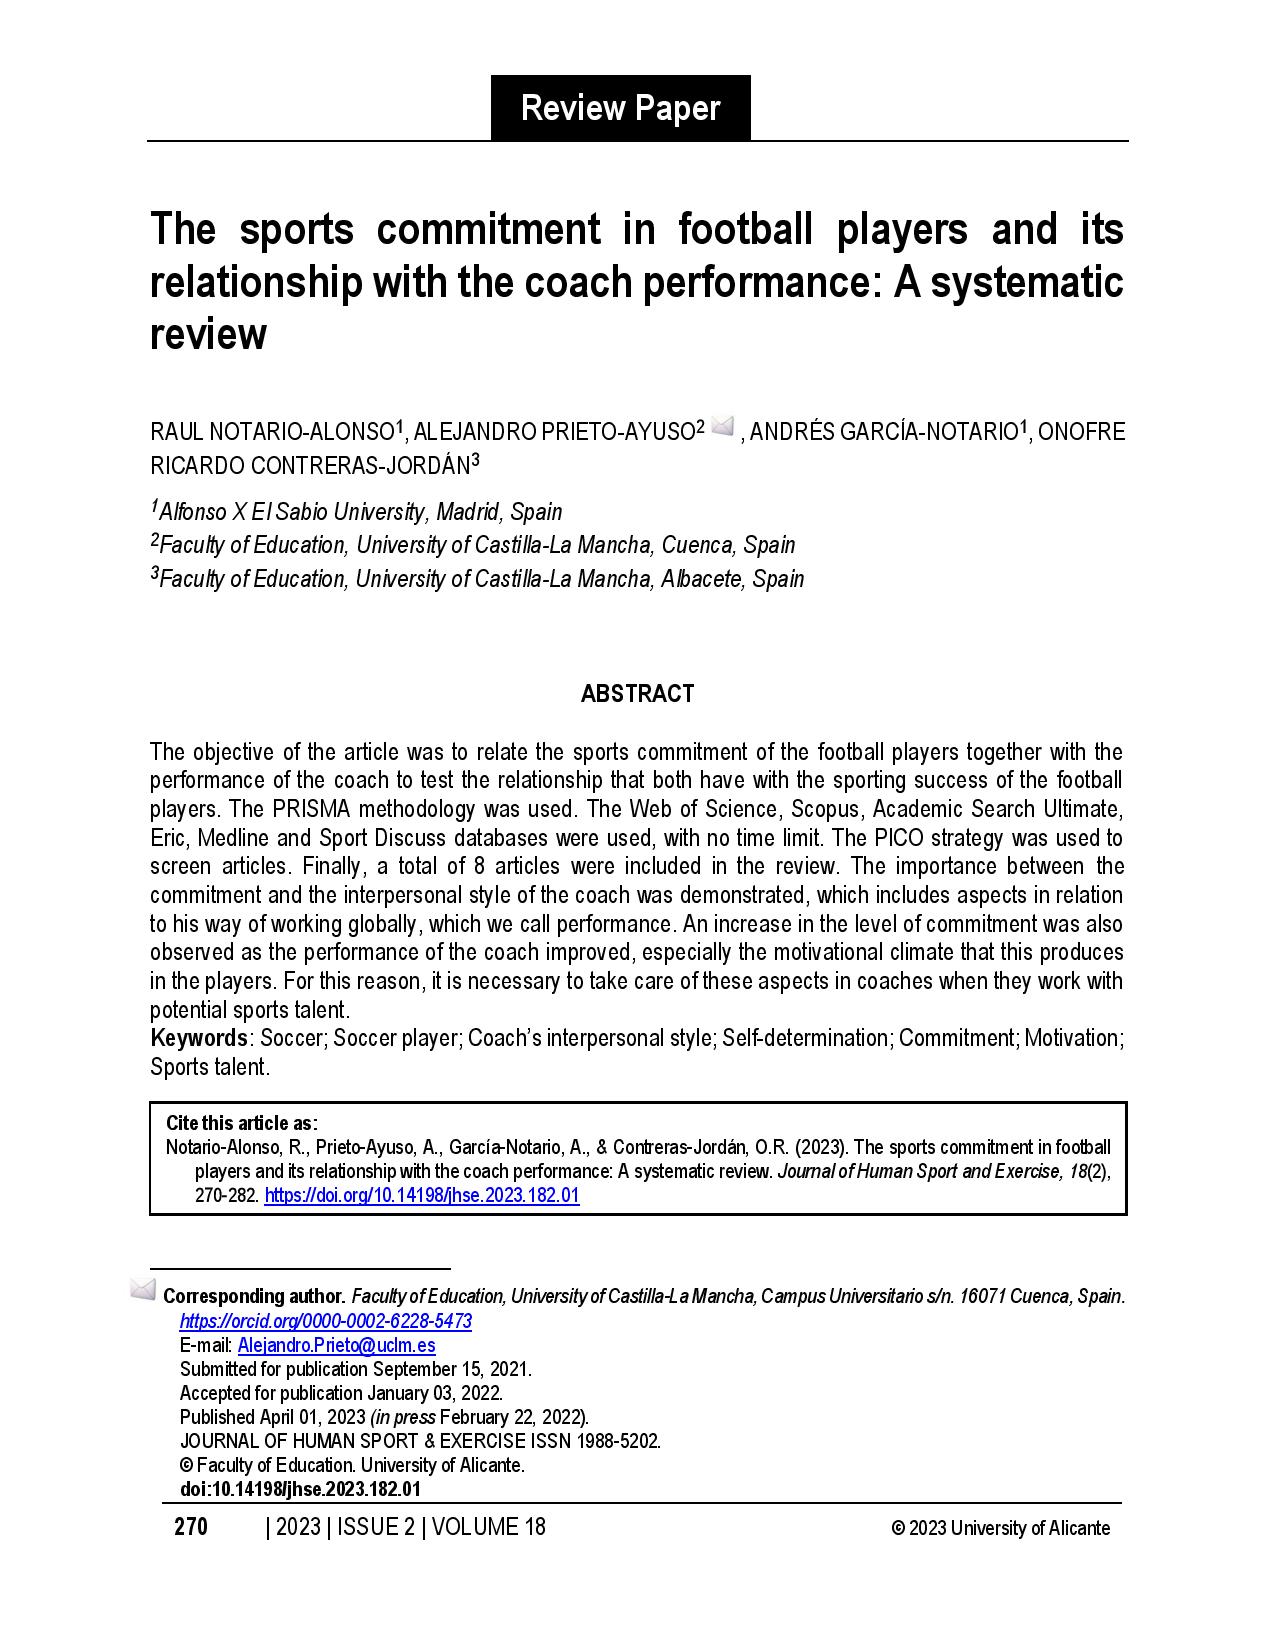 The sports commitment in football players and its relationship with the coach performance: A systematic review